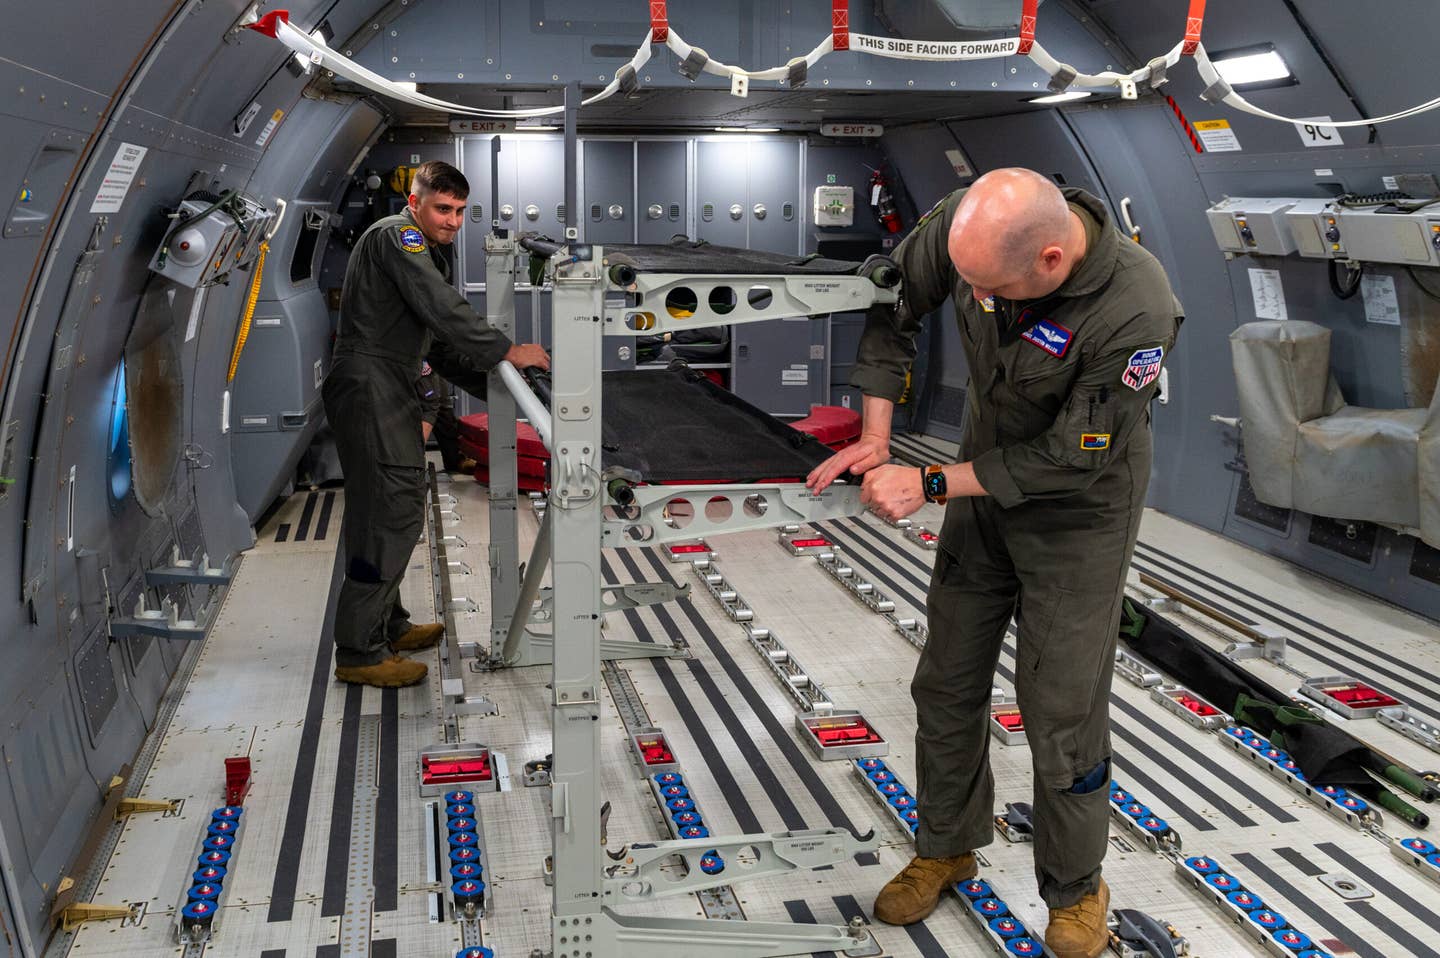 Staff Sgt. Jonathan Sanders and Master Sgt. Justin Miller, 349th Air Refueling Squadron boom operators, set up palletized cots in the back of a KC-46A Pegasus May 5, 2022. The crew were flying a 24-hour sortie, the longest in Air Mobility Command’s history. In order to ensure the safety of the flight, two pilot crews rotated on and off four-hour shifts allowing adequate time for rest. (U.S. Air Force photo by Airman Brenden Beezley)